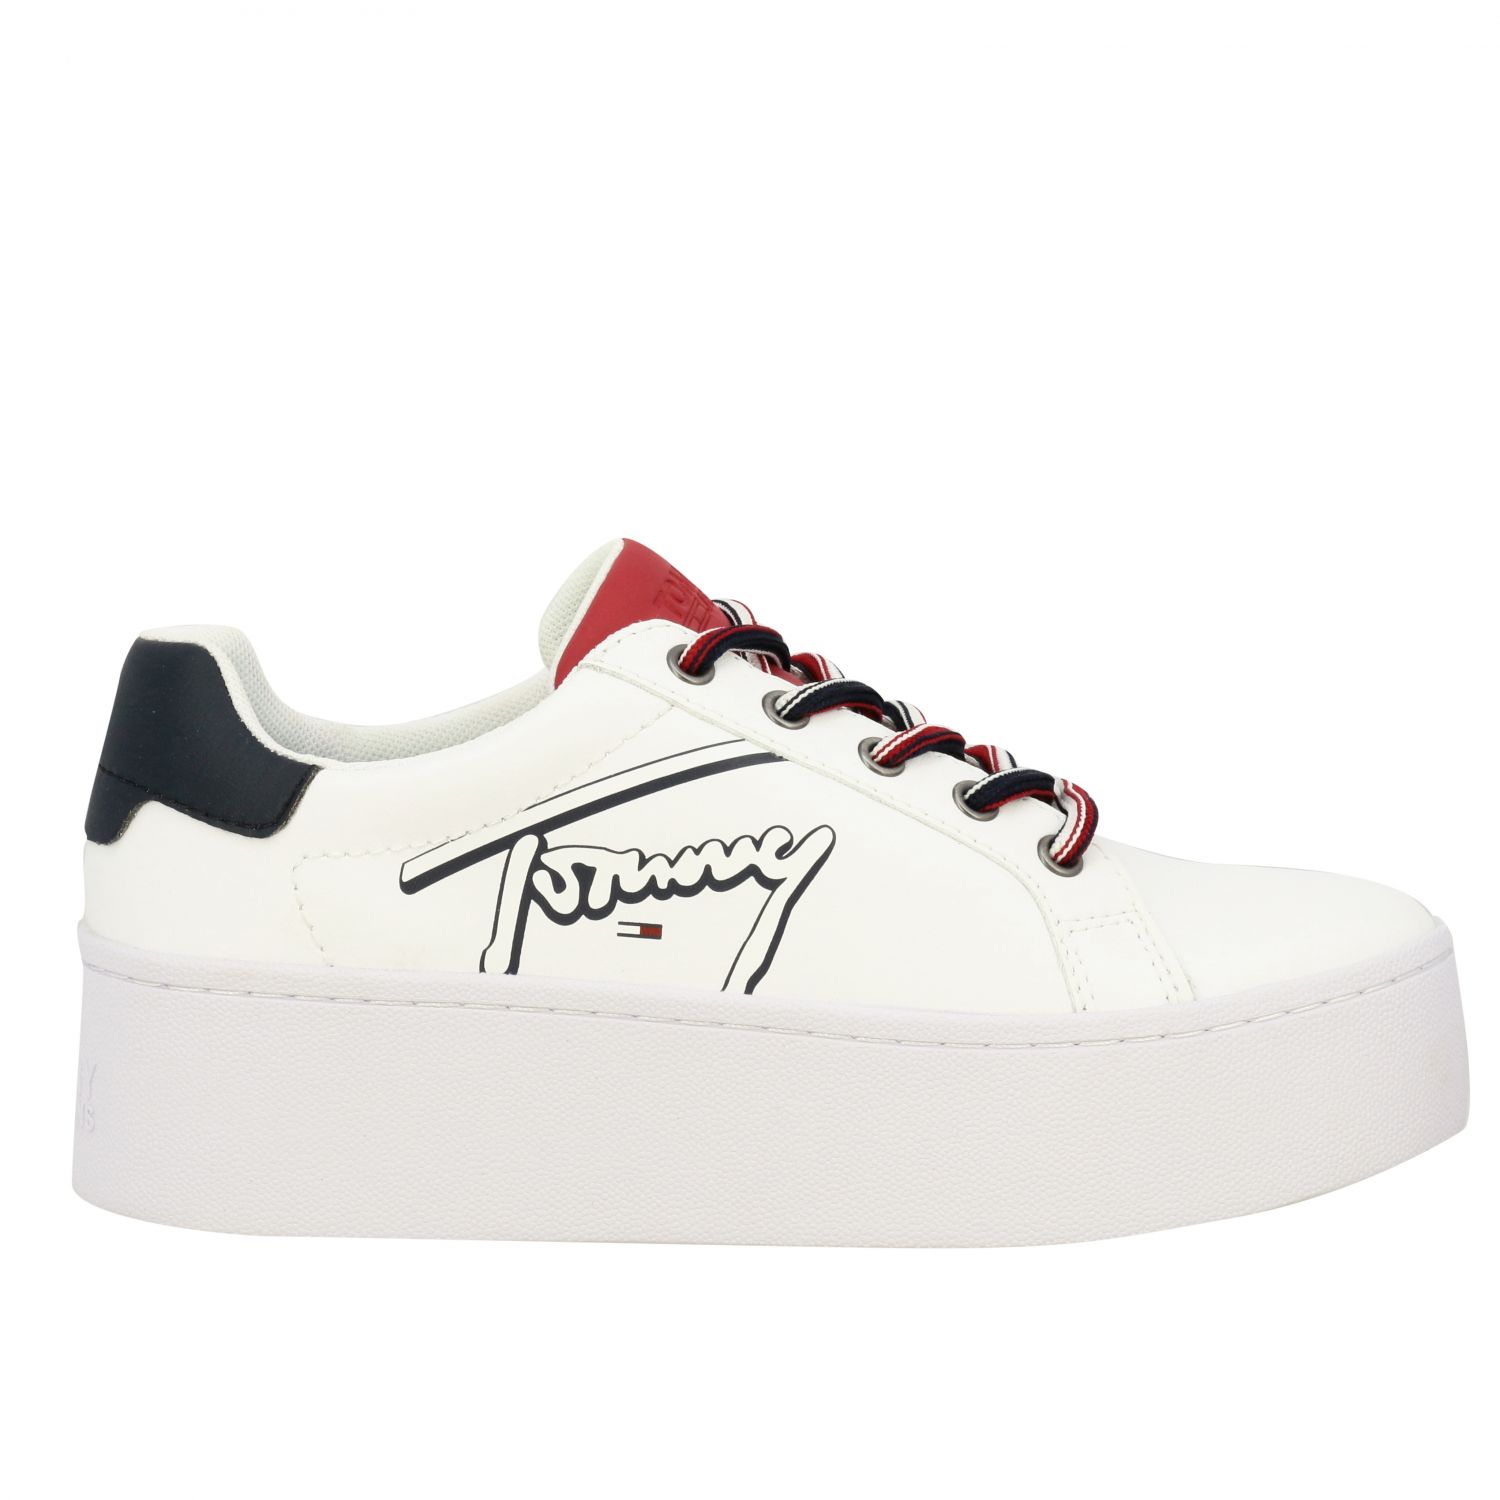 tommy hilfiger womens white sneakers